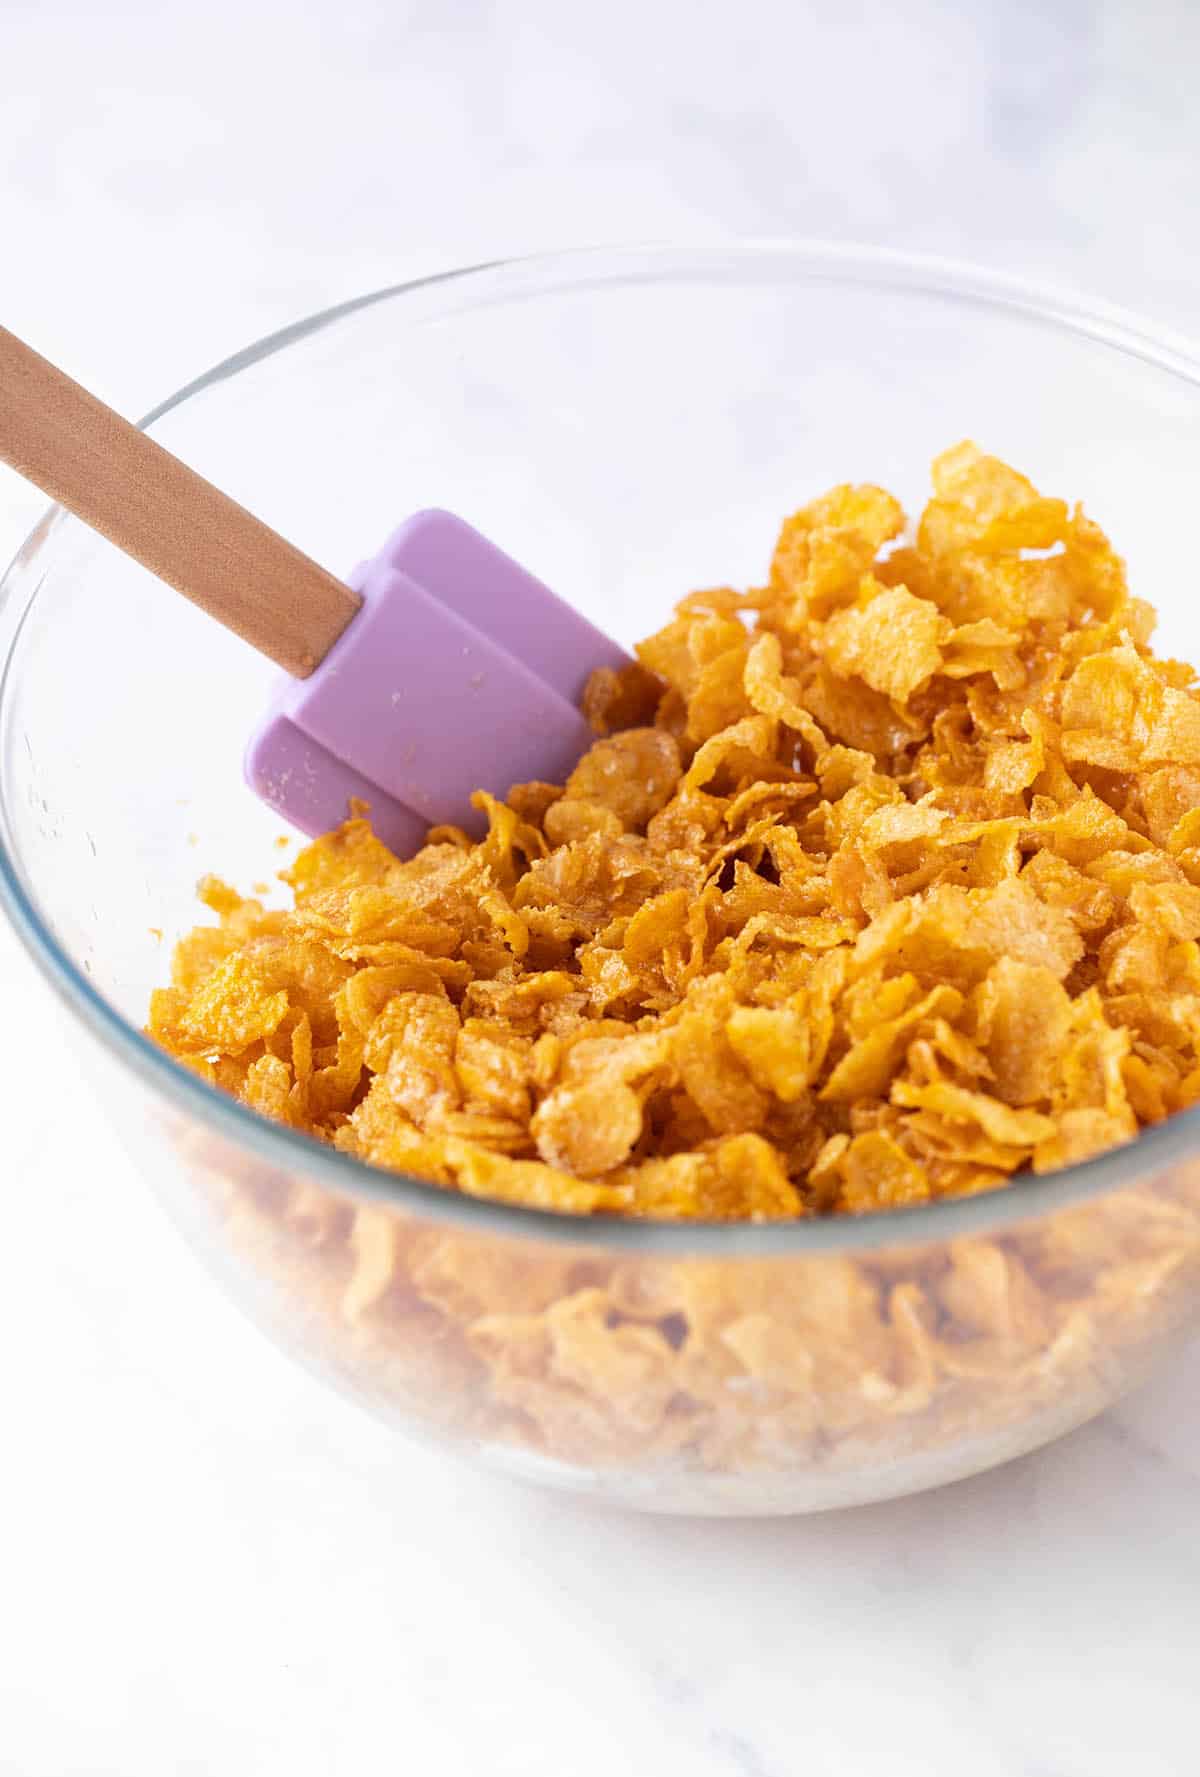 A bowl of cornflakes with a purple spatula.